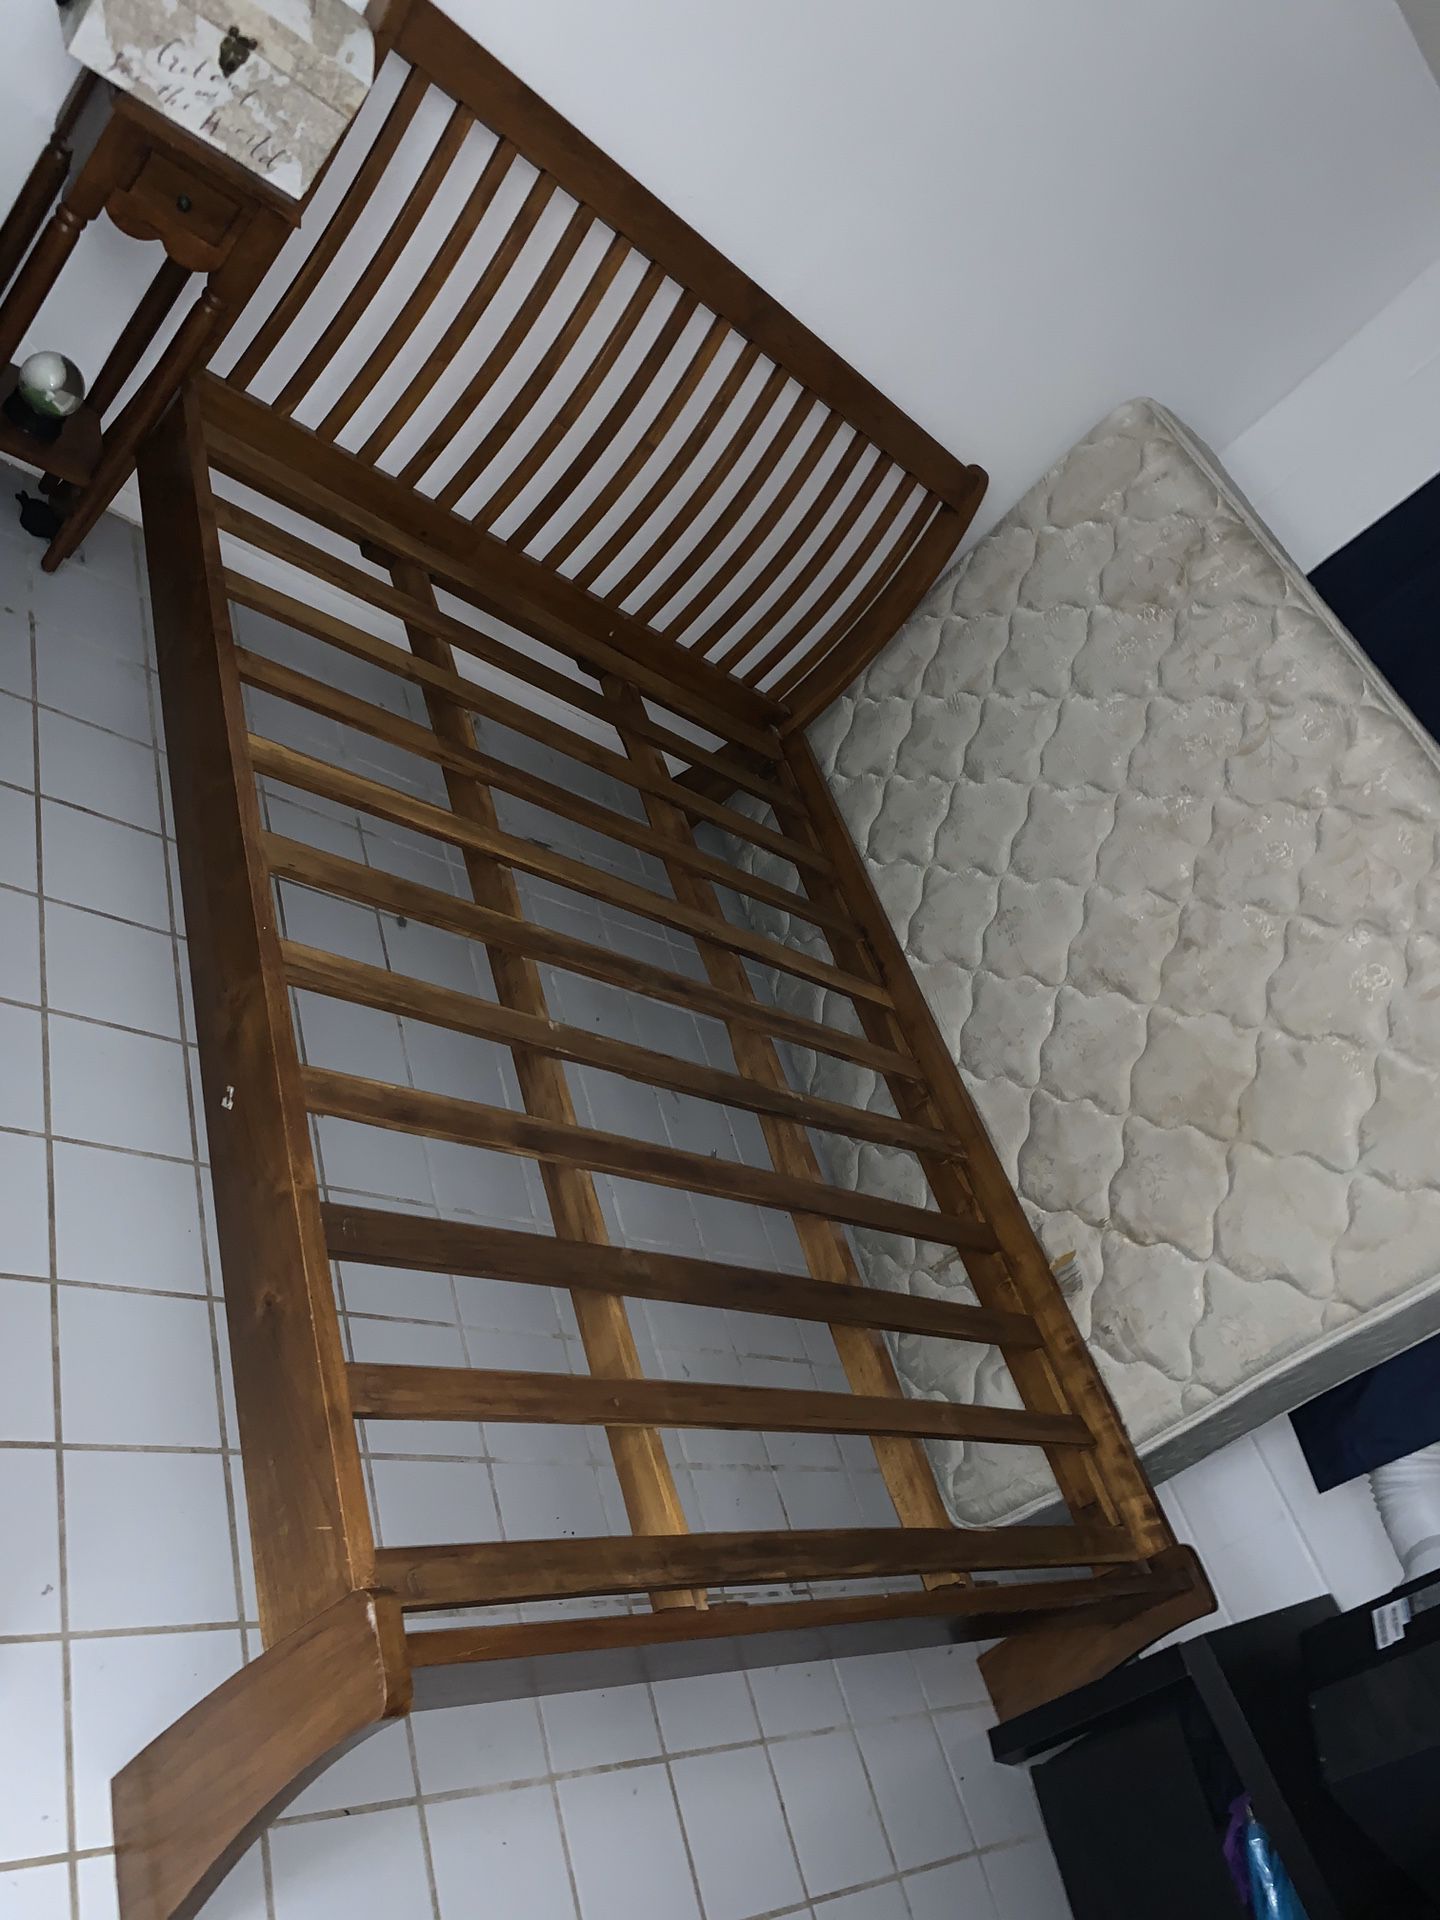 Bed Frame Soli Wood Must Sell $800 OBO